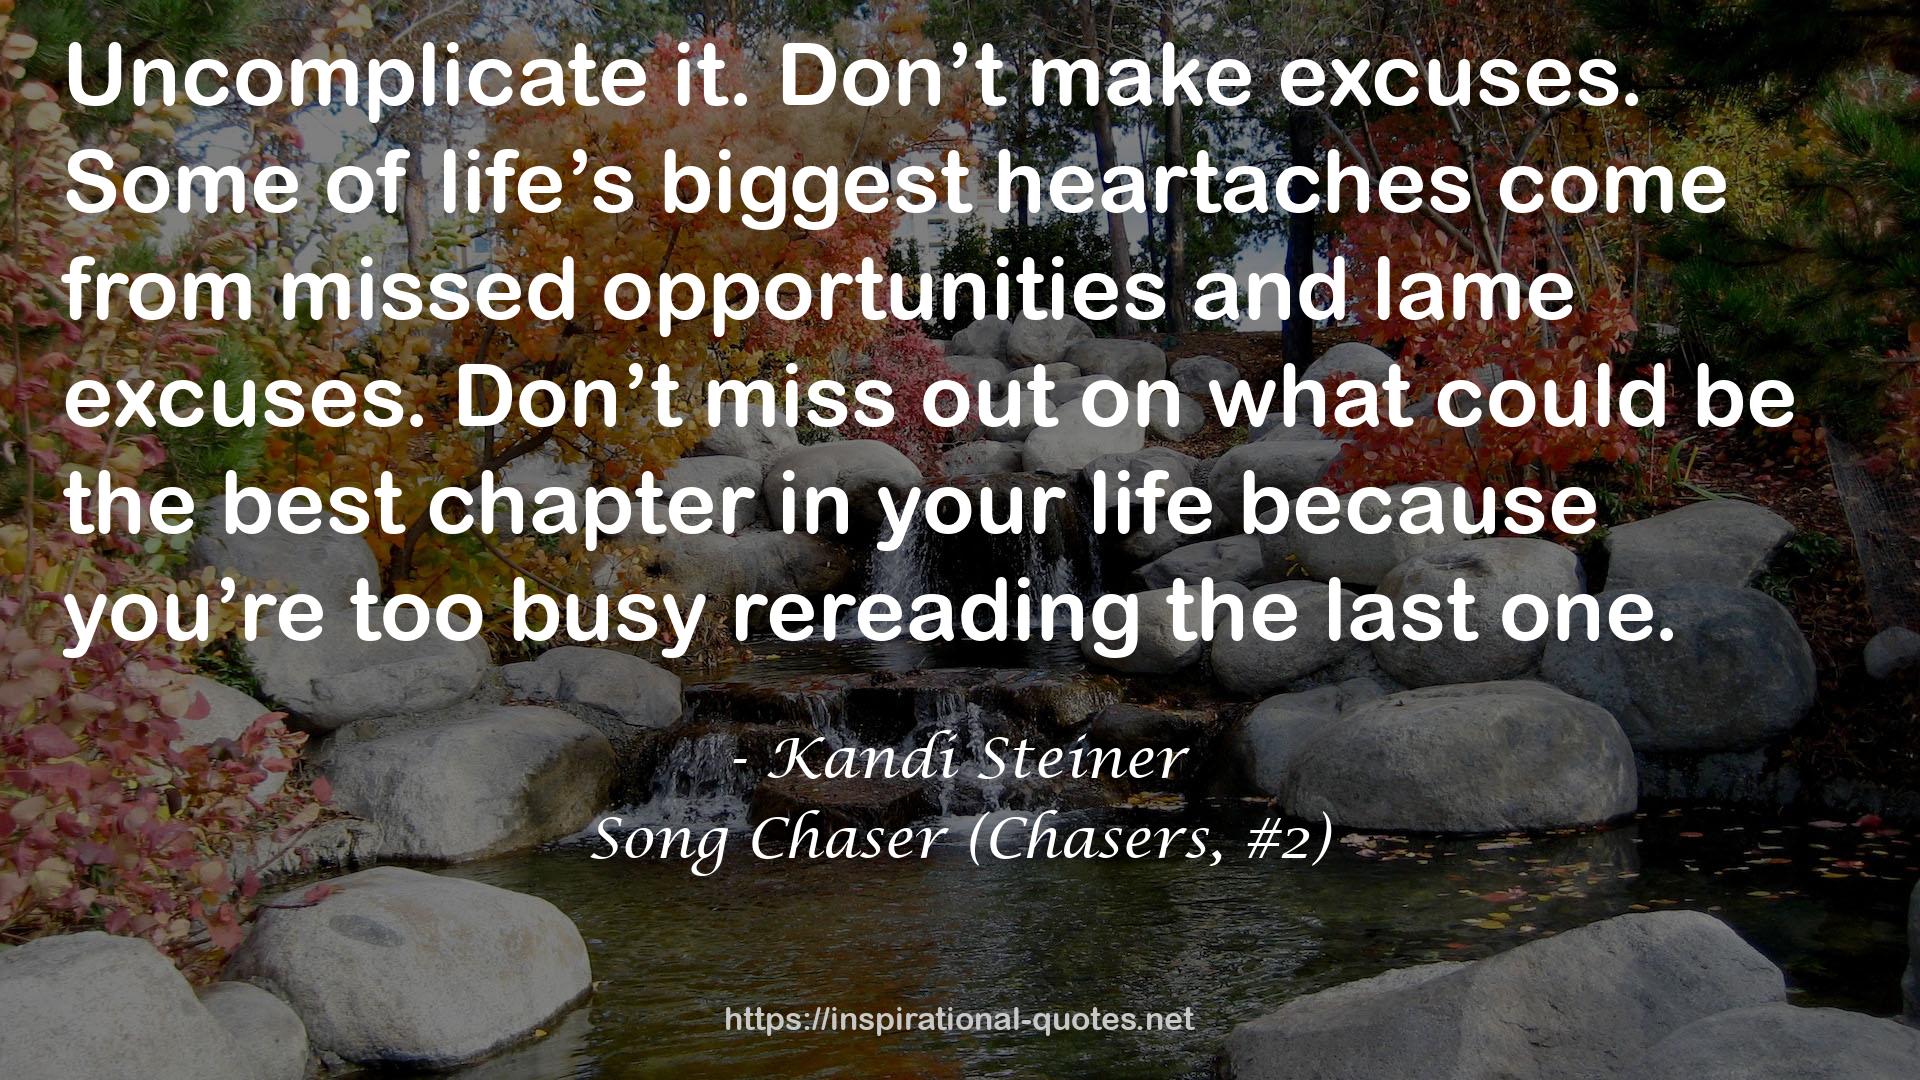 Song Chaser (Chasers, #2) QUOTES